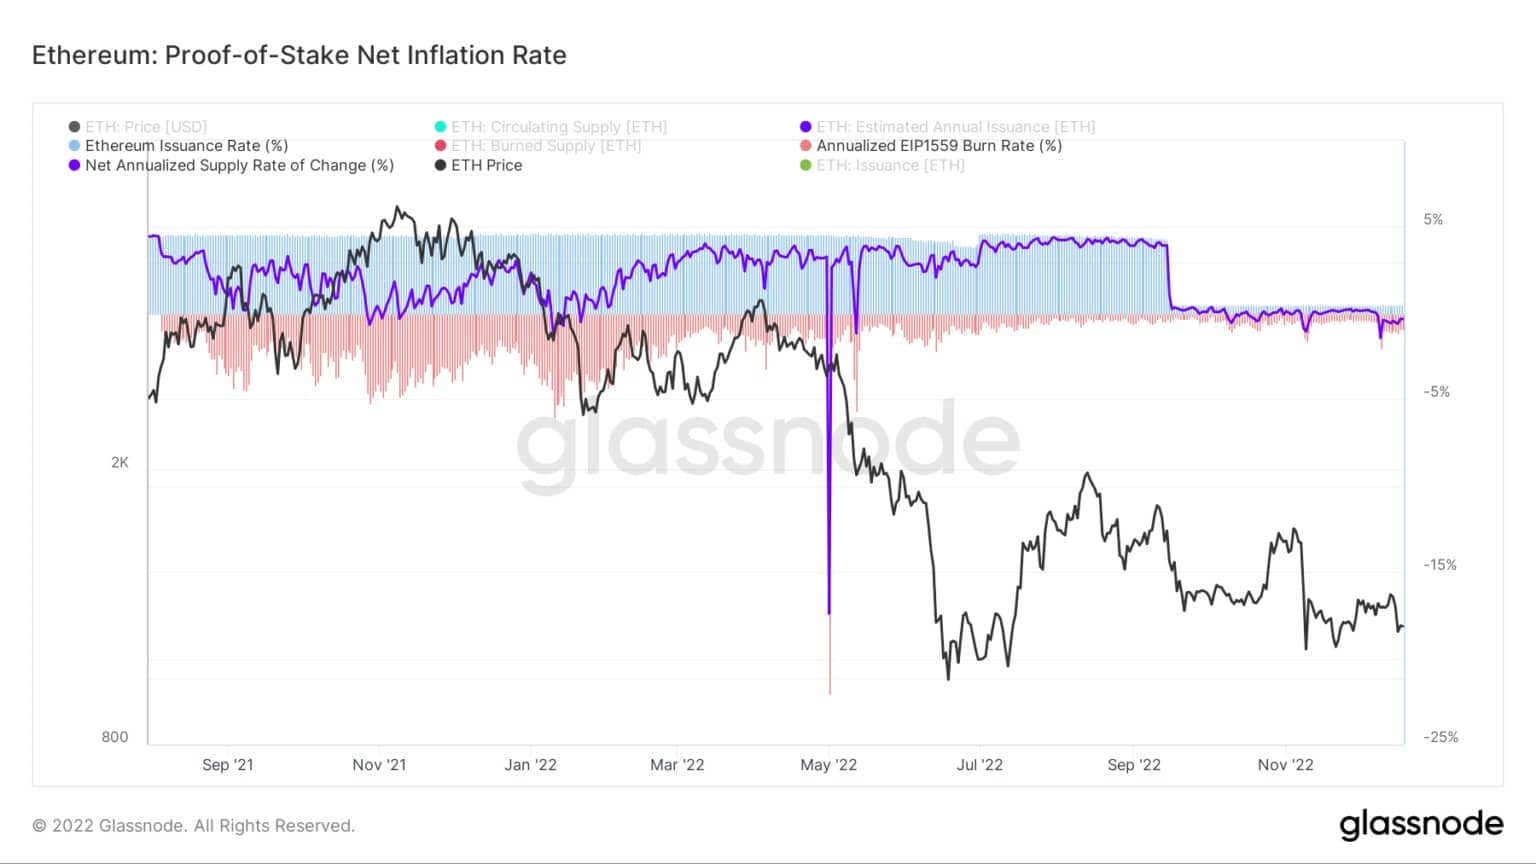 Ethereum: Proof of Stake Net Inflation Rate / Quelle: Glassnode.com